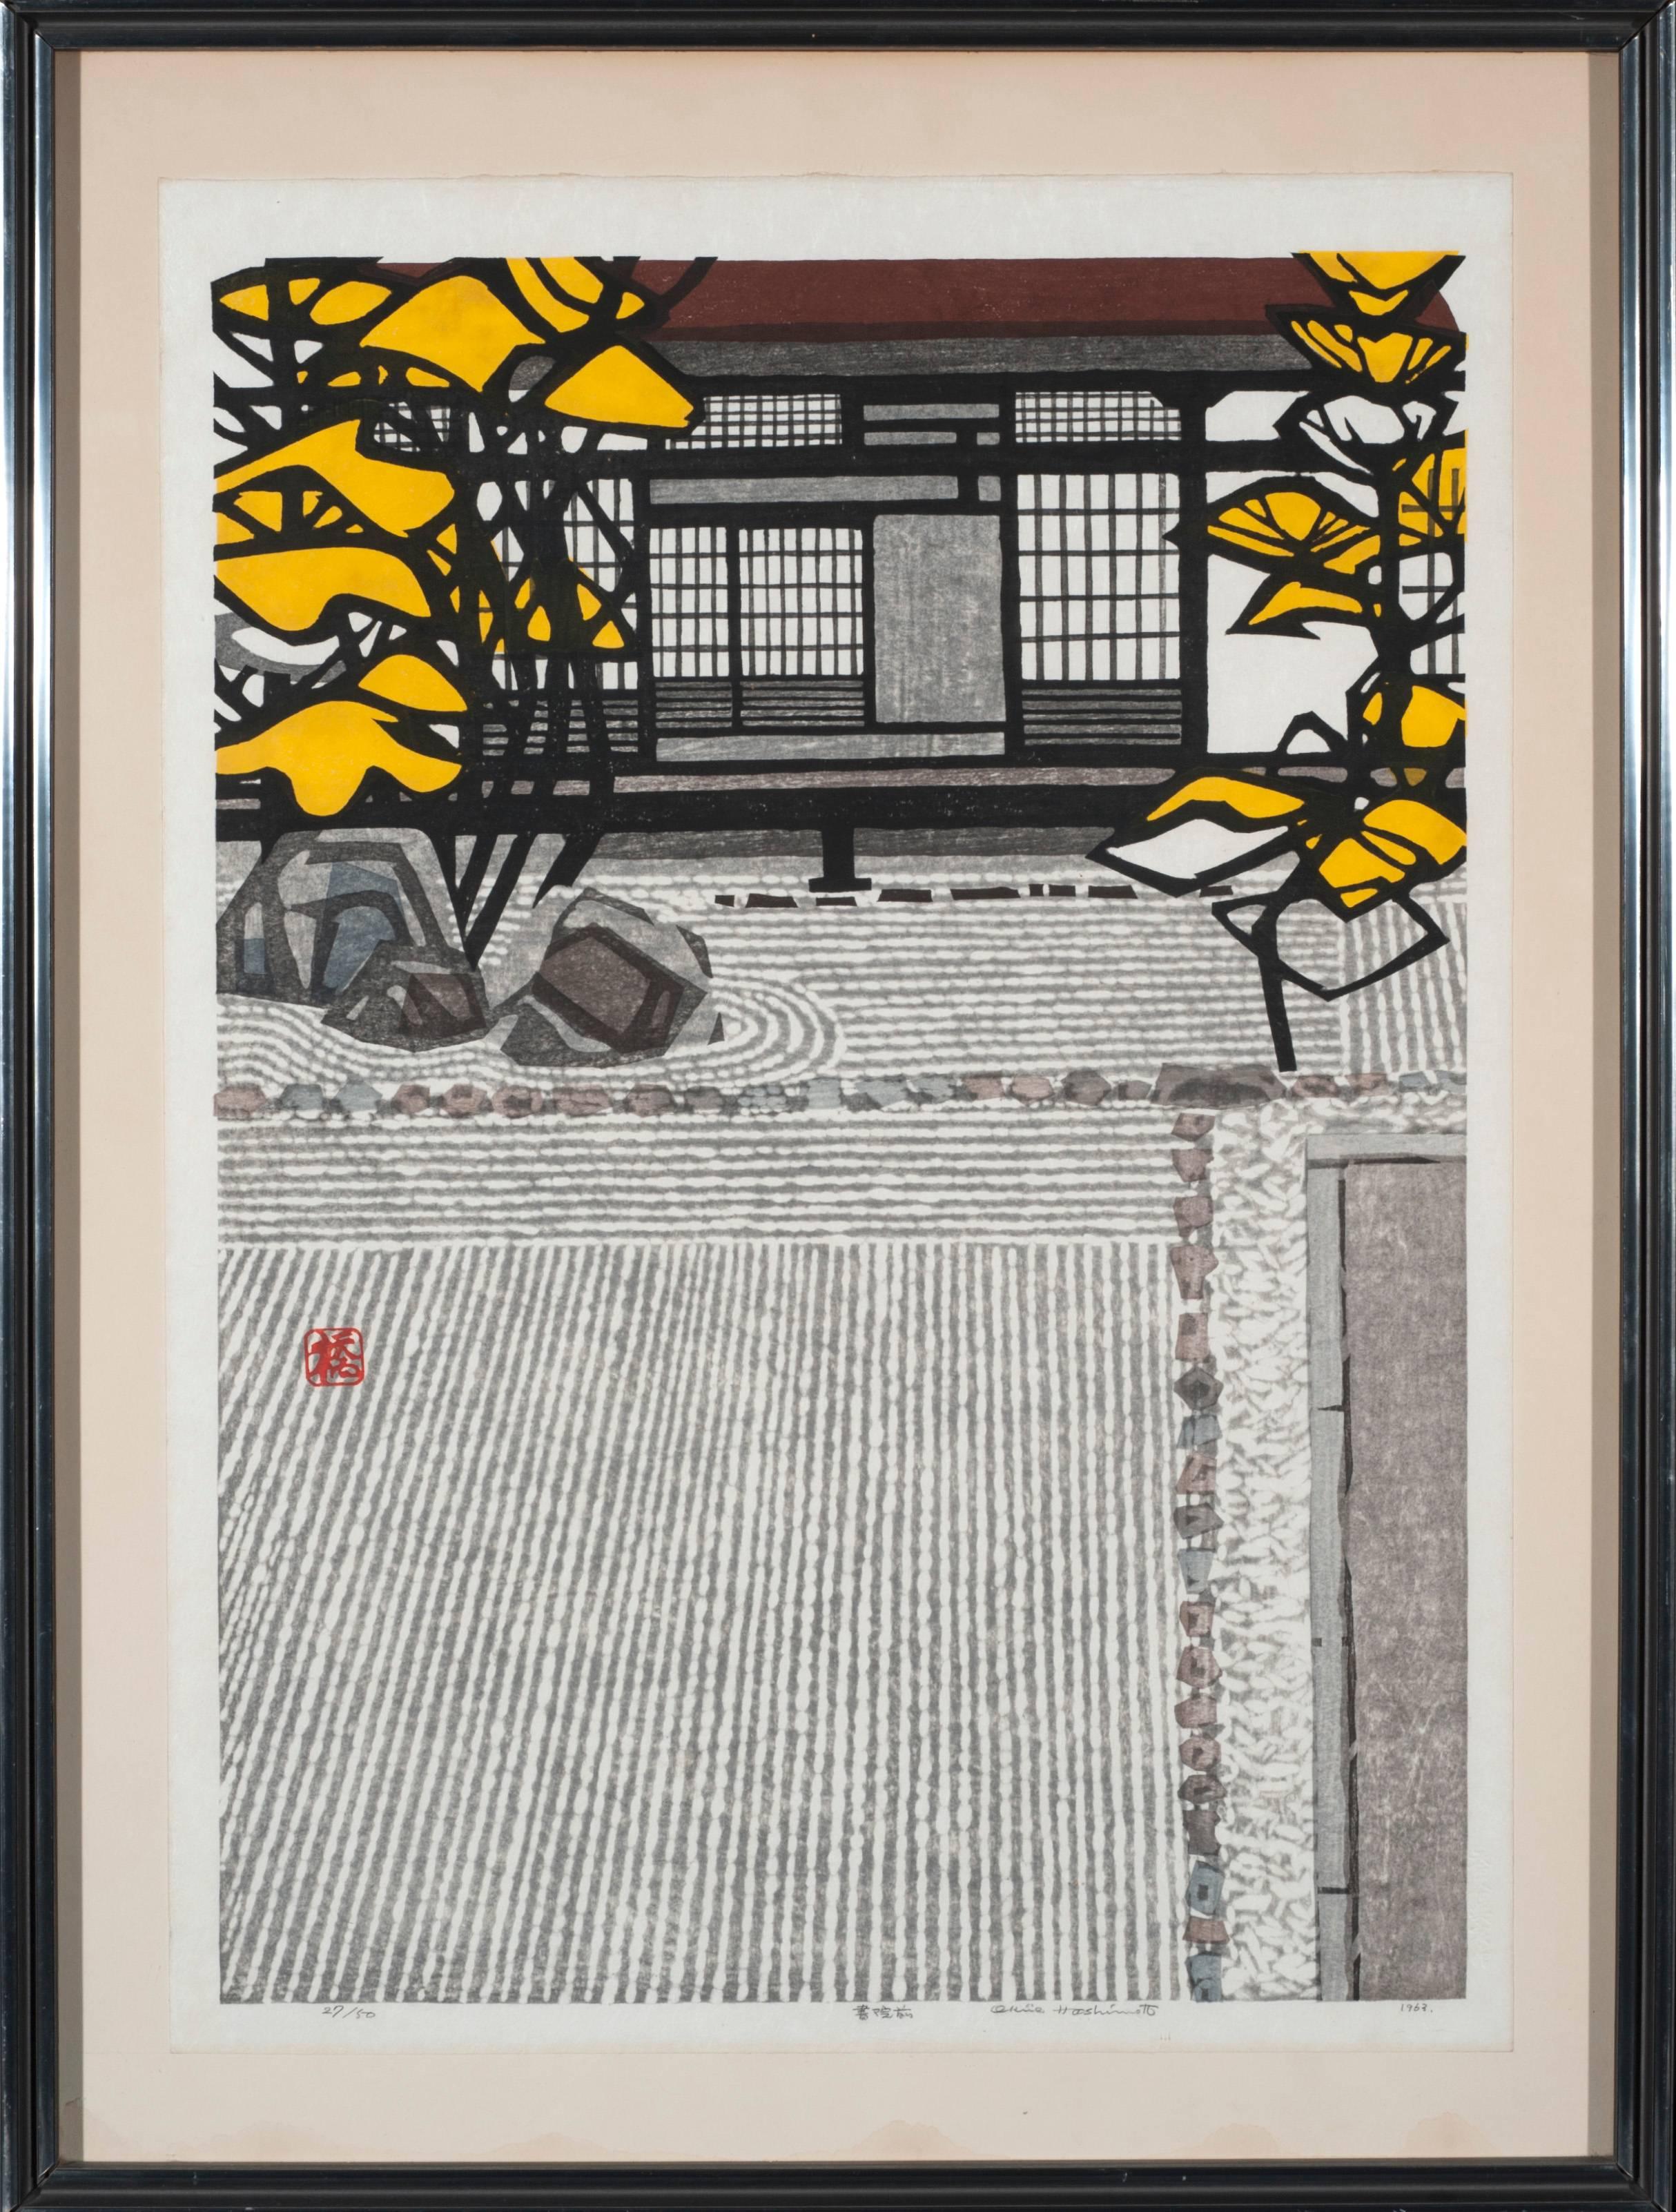 Large and impressive early contemporary Japanese print by master print maker Okiie Hashimoto (1899-1993). Self printed, the bottom margin is signed, titled in Kanji, dated 1963 and numbered 27/50. The artists red seal is at lower left. Print is